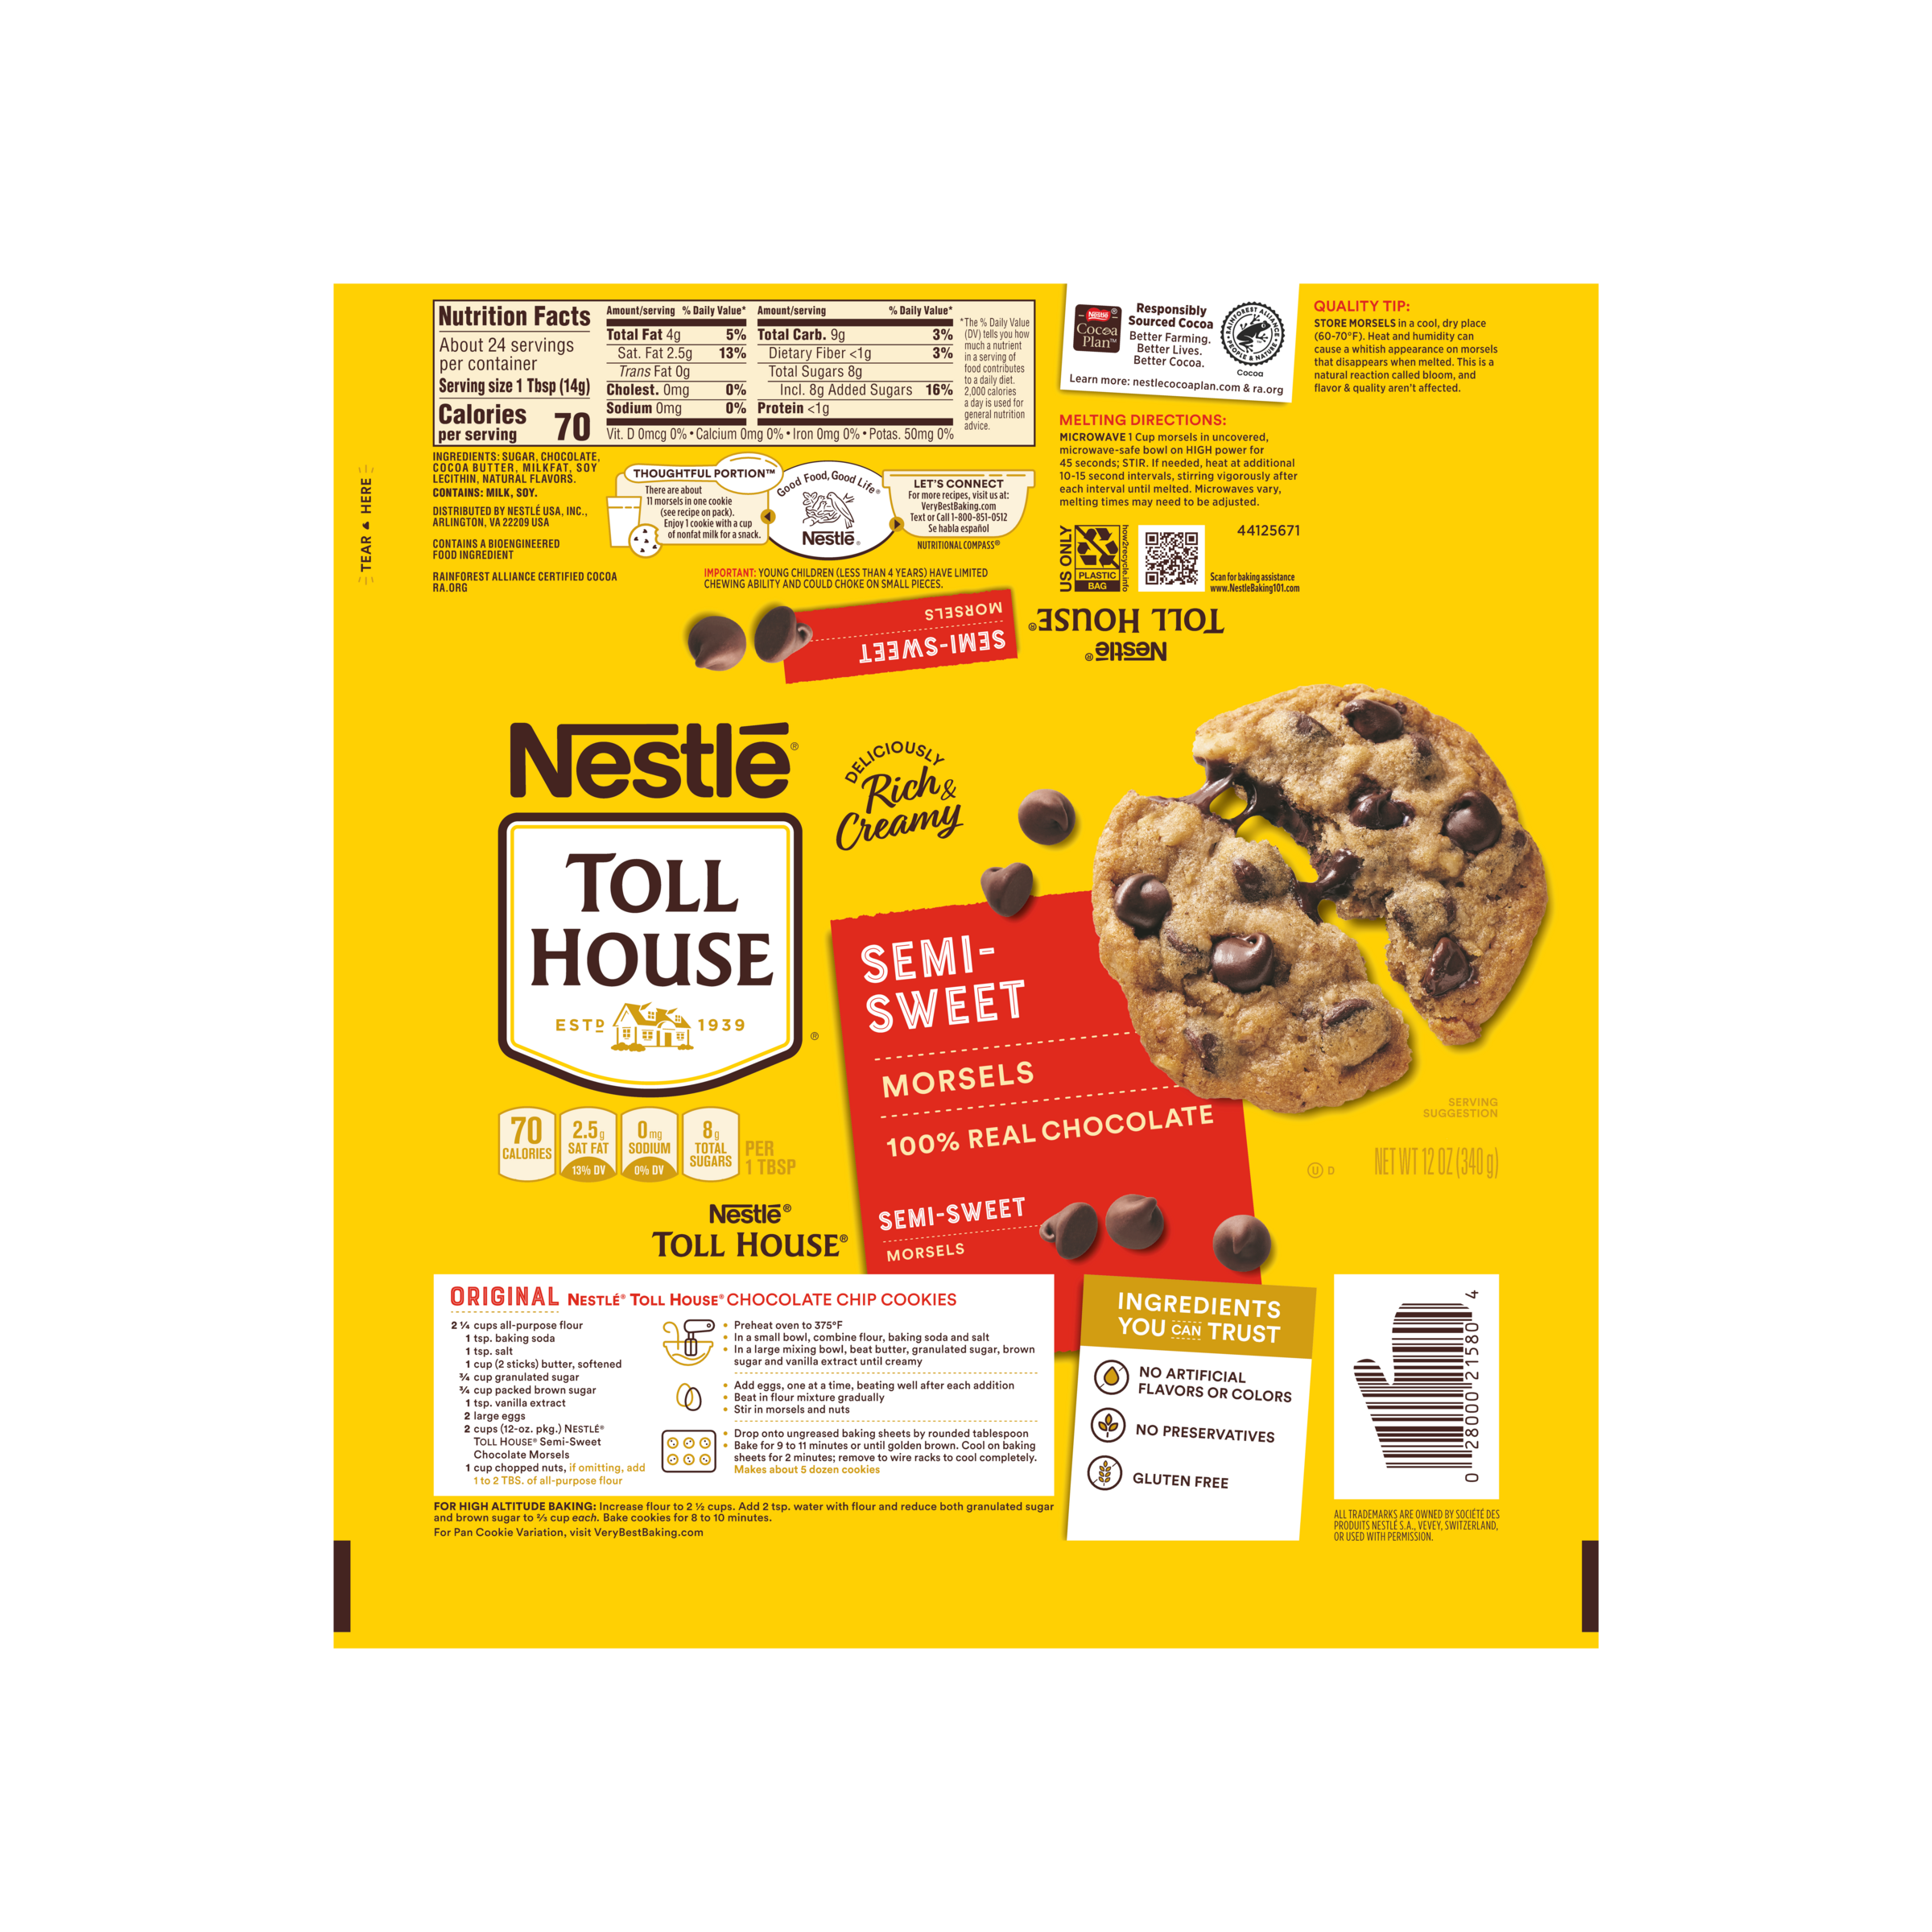 TOLL HOUSE Semi-Sweet Morsels 24 units per case 12.0 oz Product Label